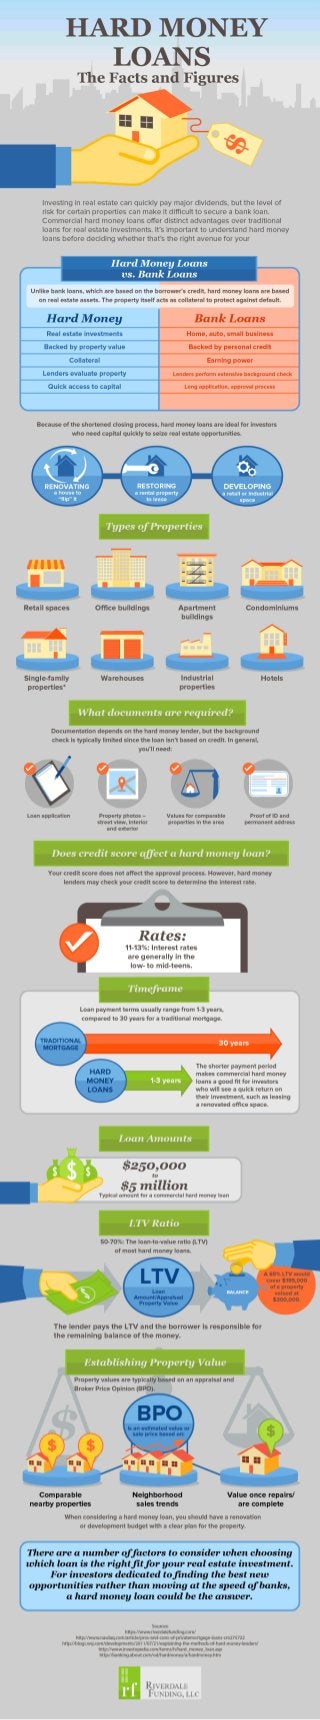 Hard Money Loans - The Facts and Figures * Infographic